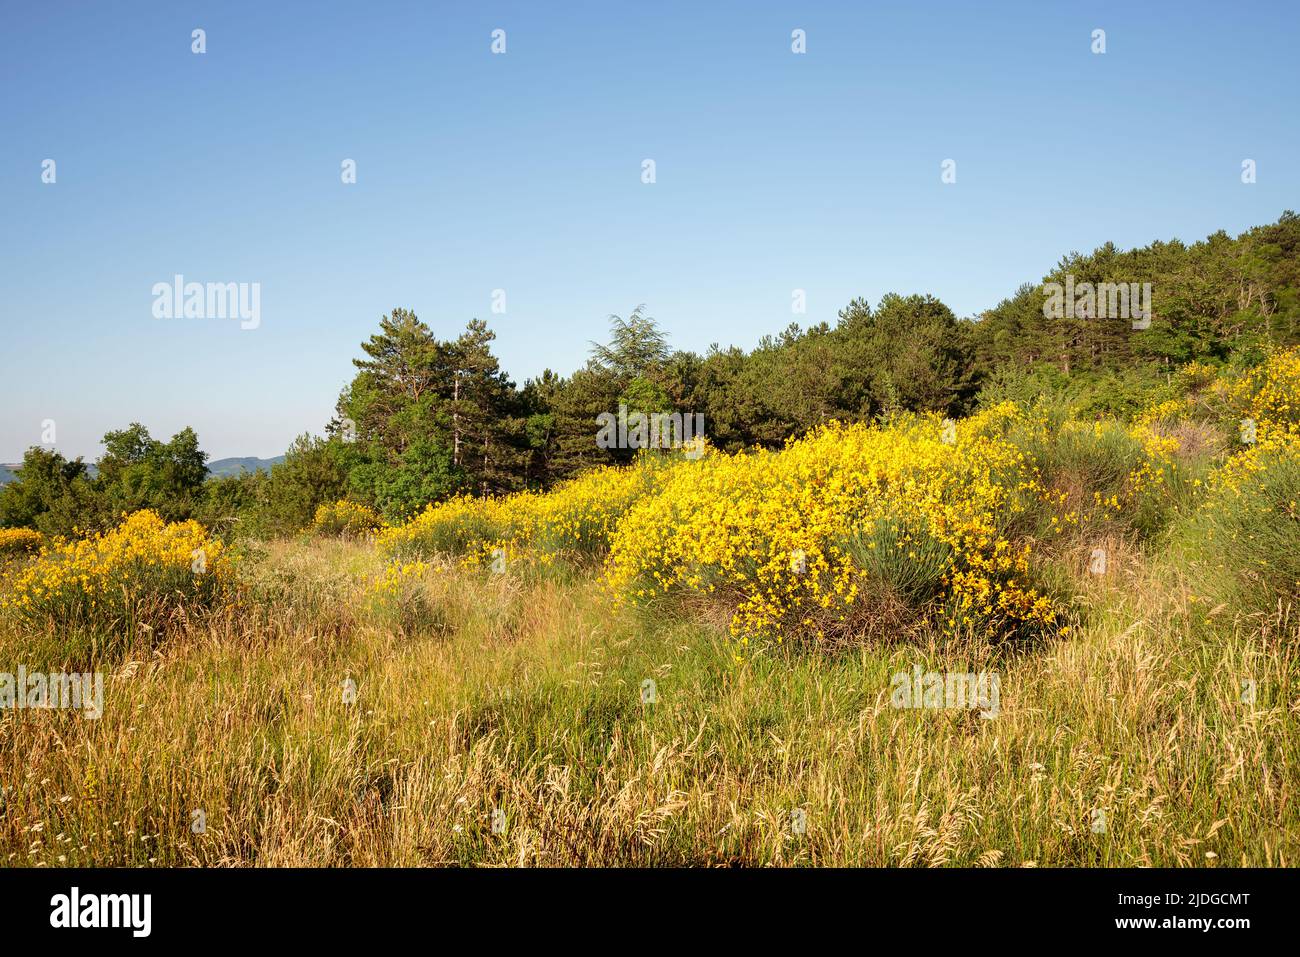 Landscape of cCesane mounts in the region of Pesaro and Urbino, Marche, Italy. Yellow brooms are flowering everywhere. The mount is covered by pine tr Stock Photo